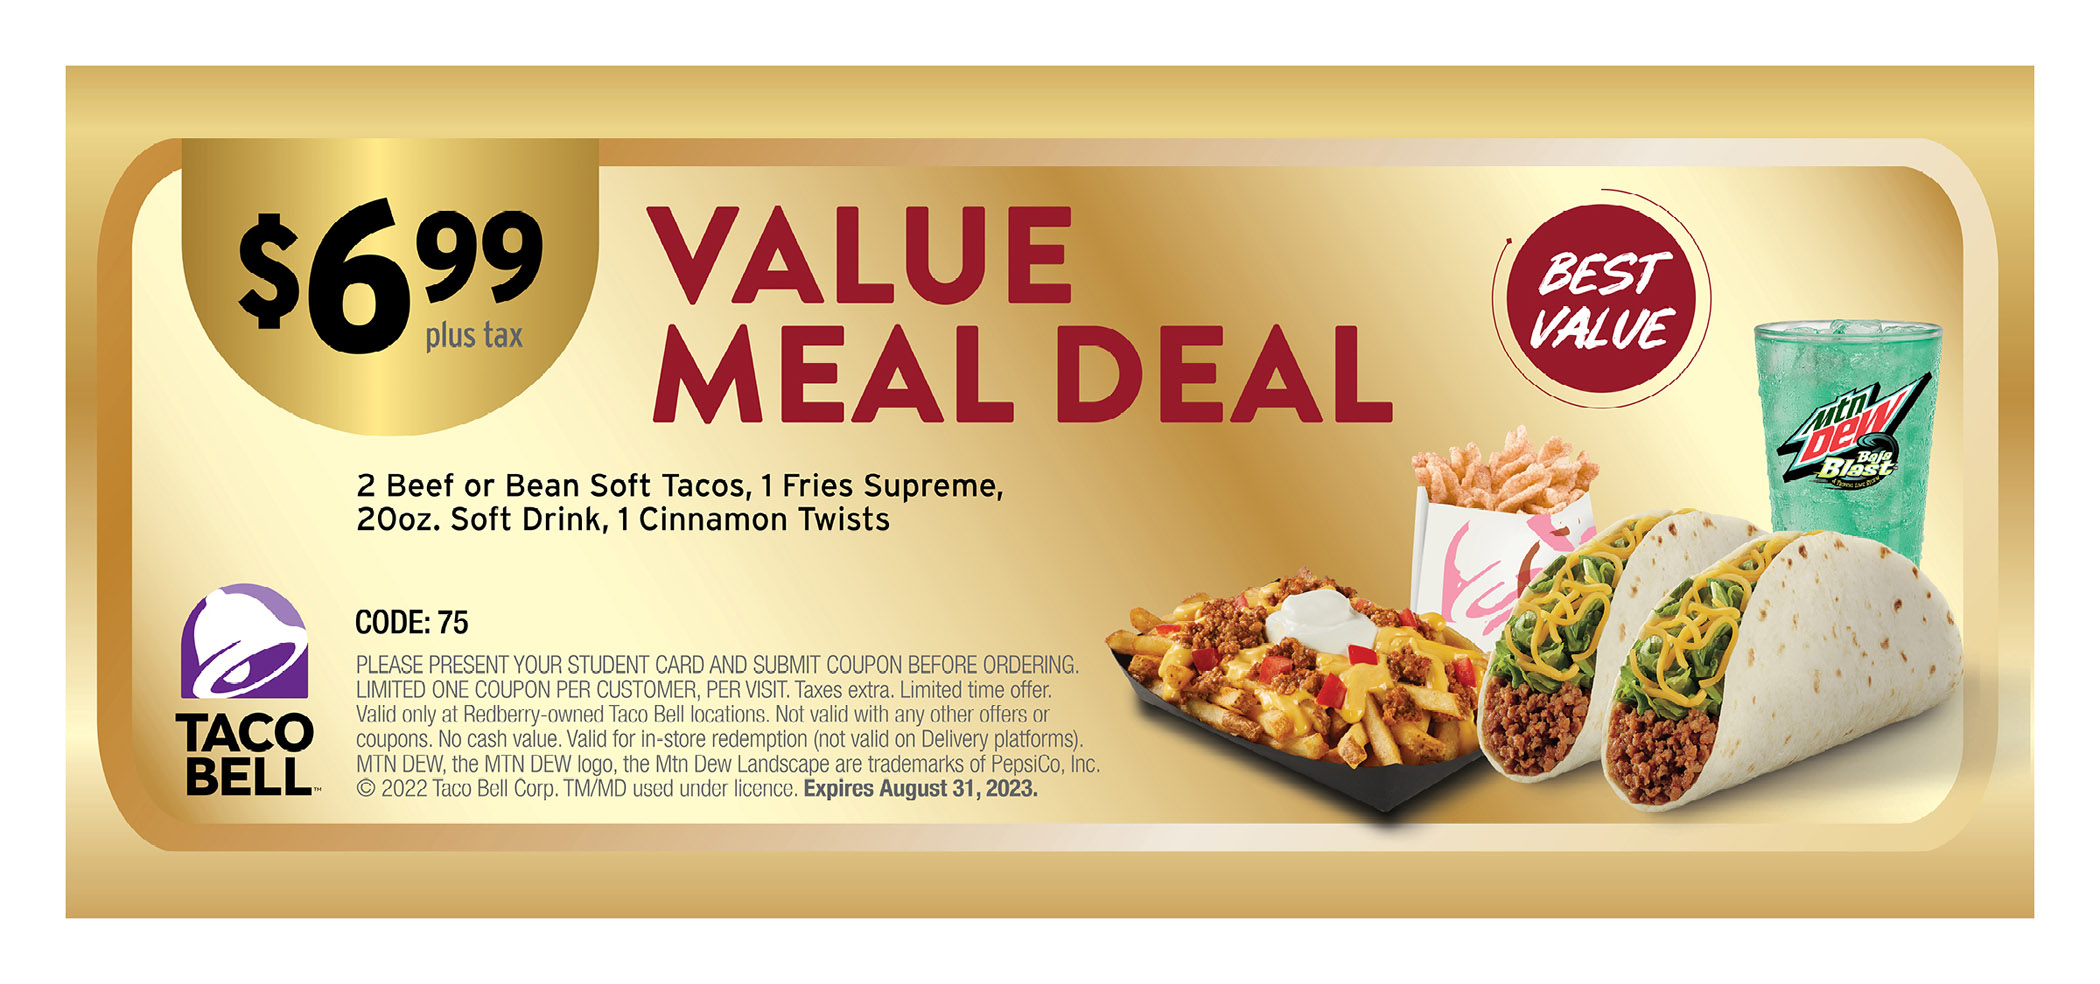 $6.99 plus tax value meal deal